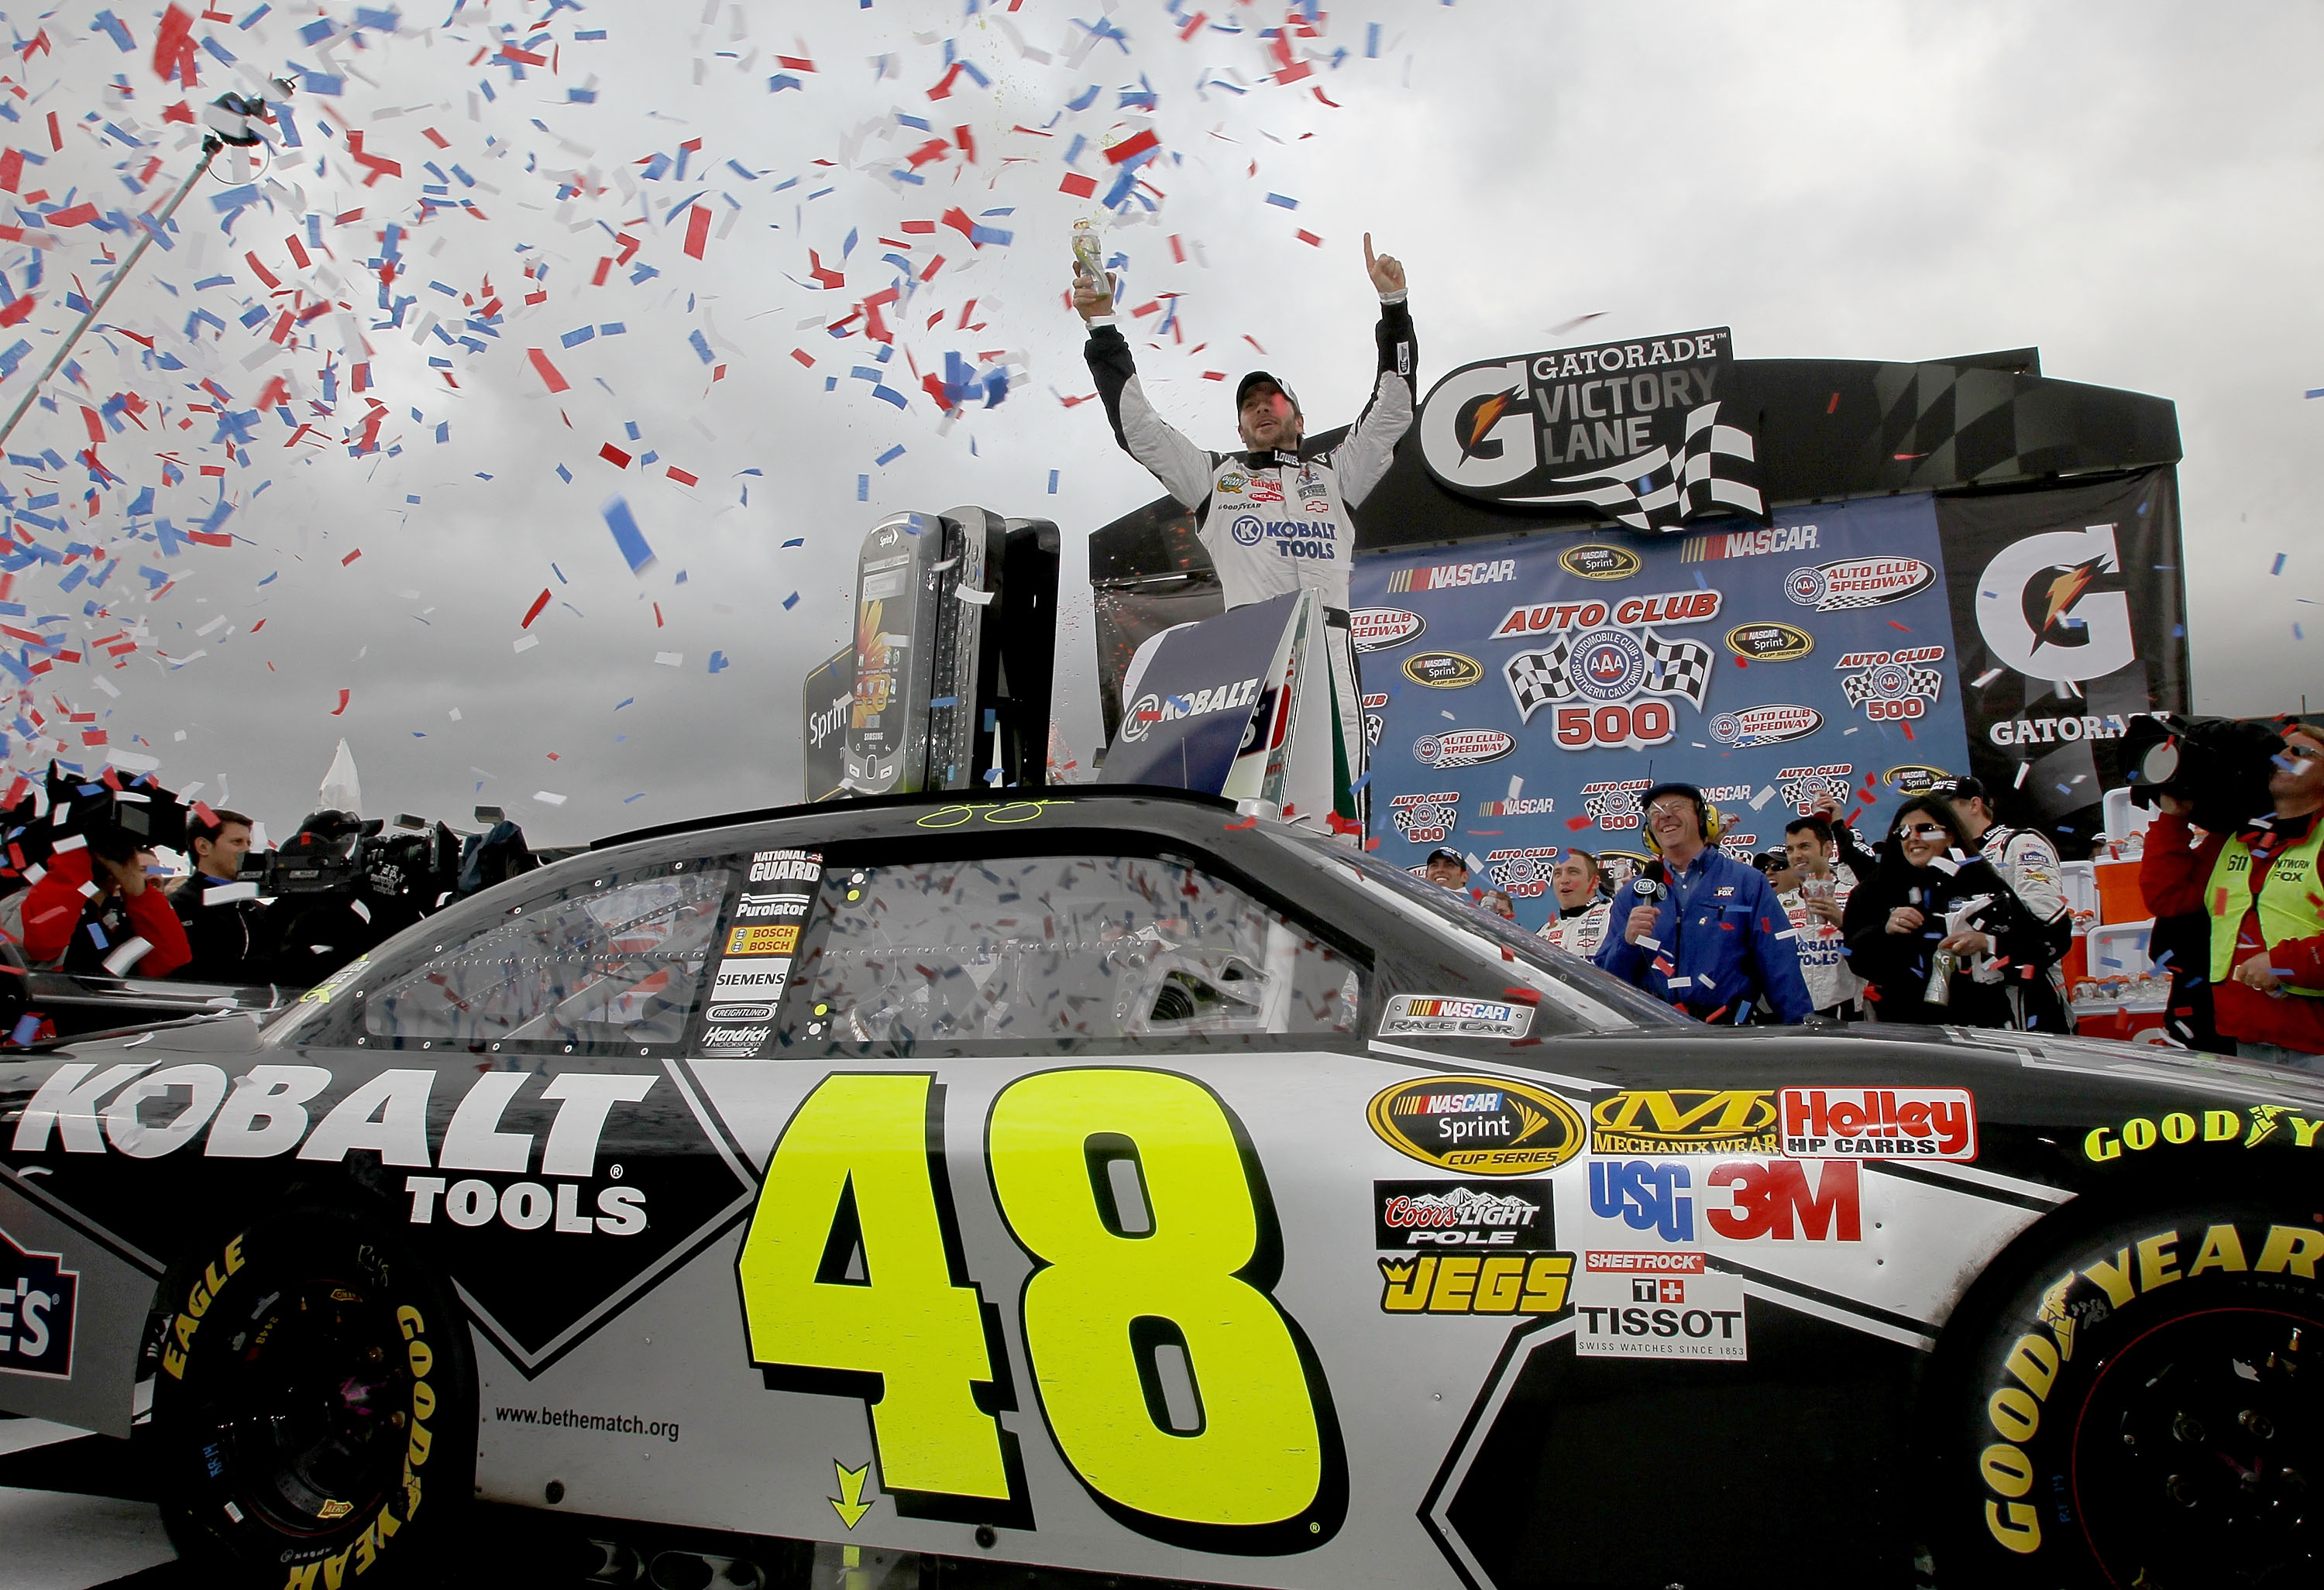 FONTANA, CA - FEBRUARY 21:  Jimmie Johnson, driver of the #48 Lowe's/Kobalt Tools Chevrolet, celebrates in victory lane after winning the NASCAR Sprint Cup Series Auto Club 500 at Auto Club Speedway on February 21, 2010 in Fontana, California.  (Photo by